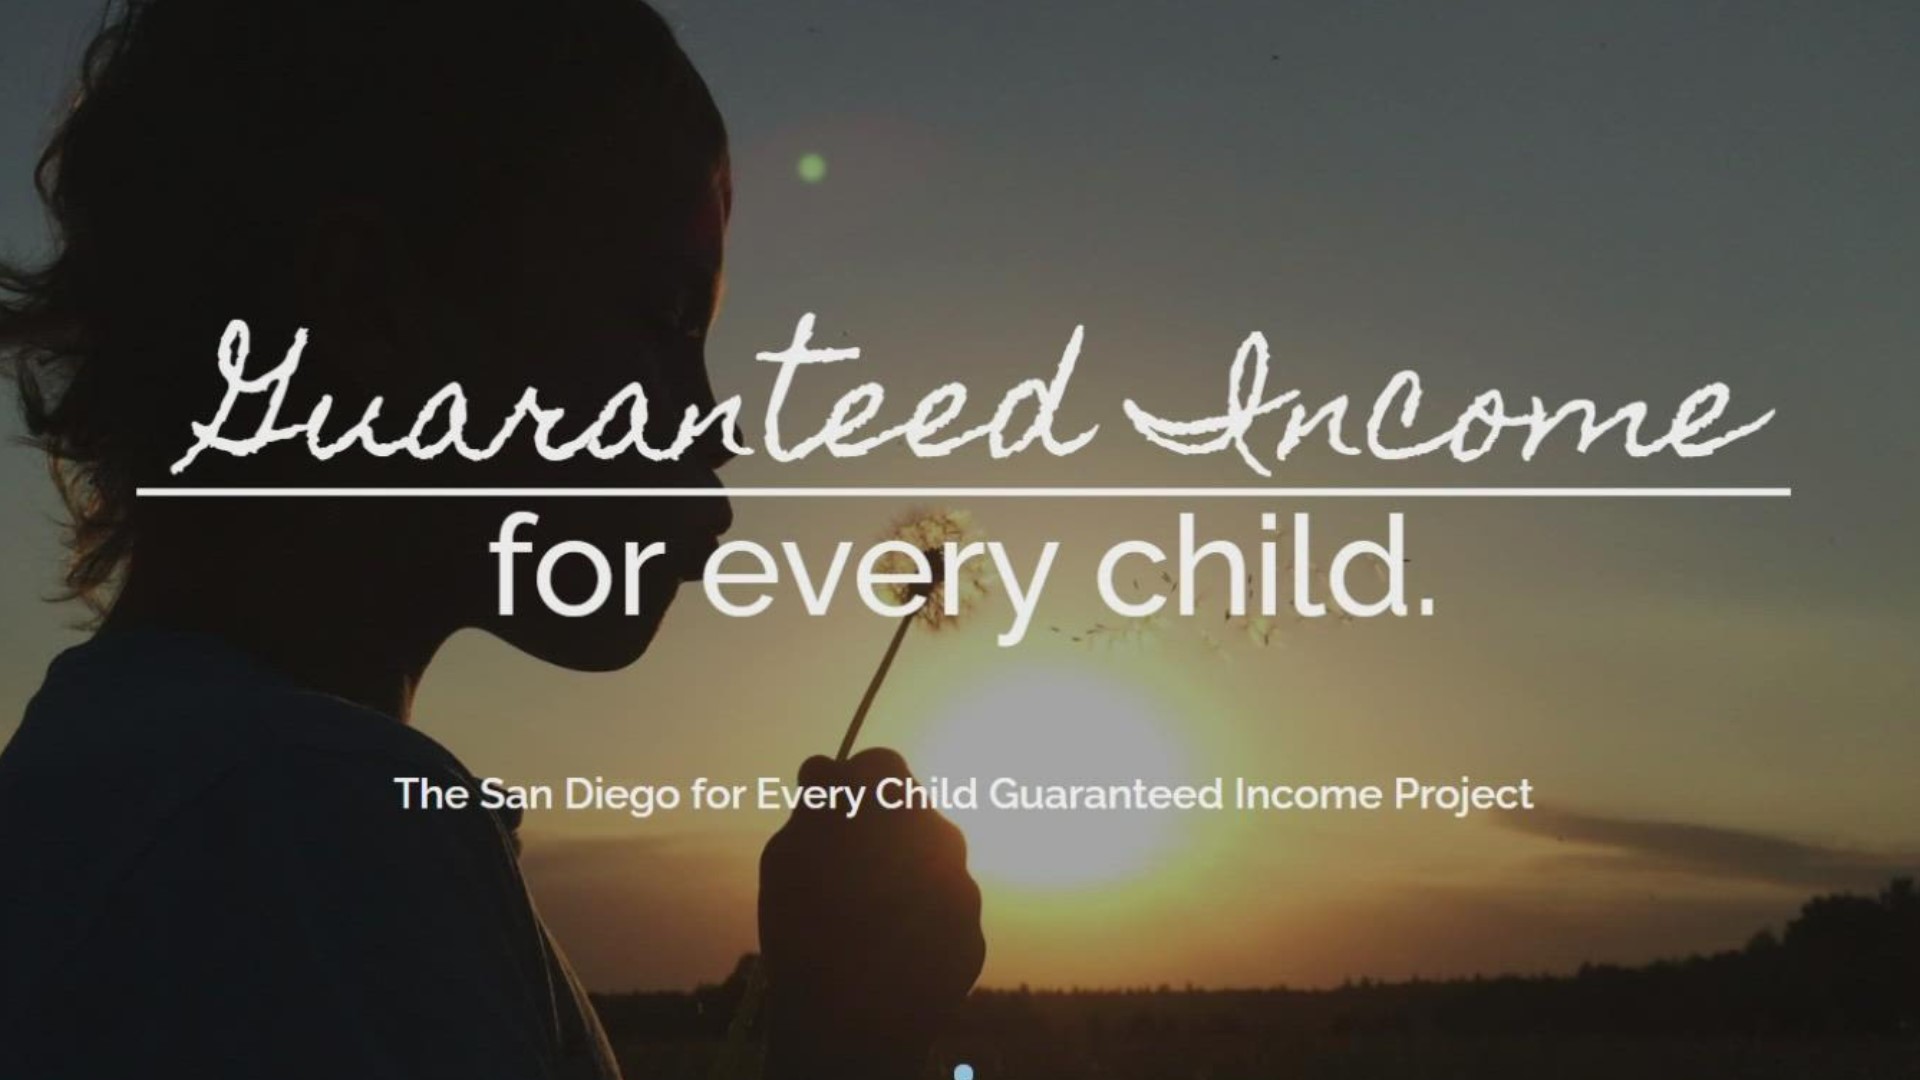 The non-profit coalition, San Diego for Every Child, received the funds to support San Diego’s first Guaranteed Income Project.